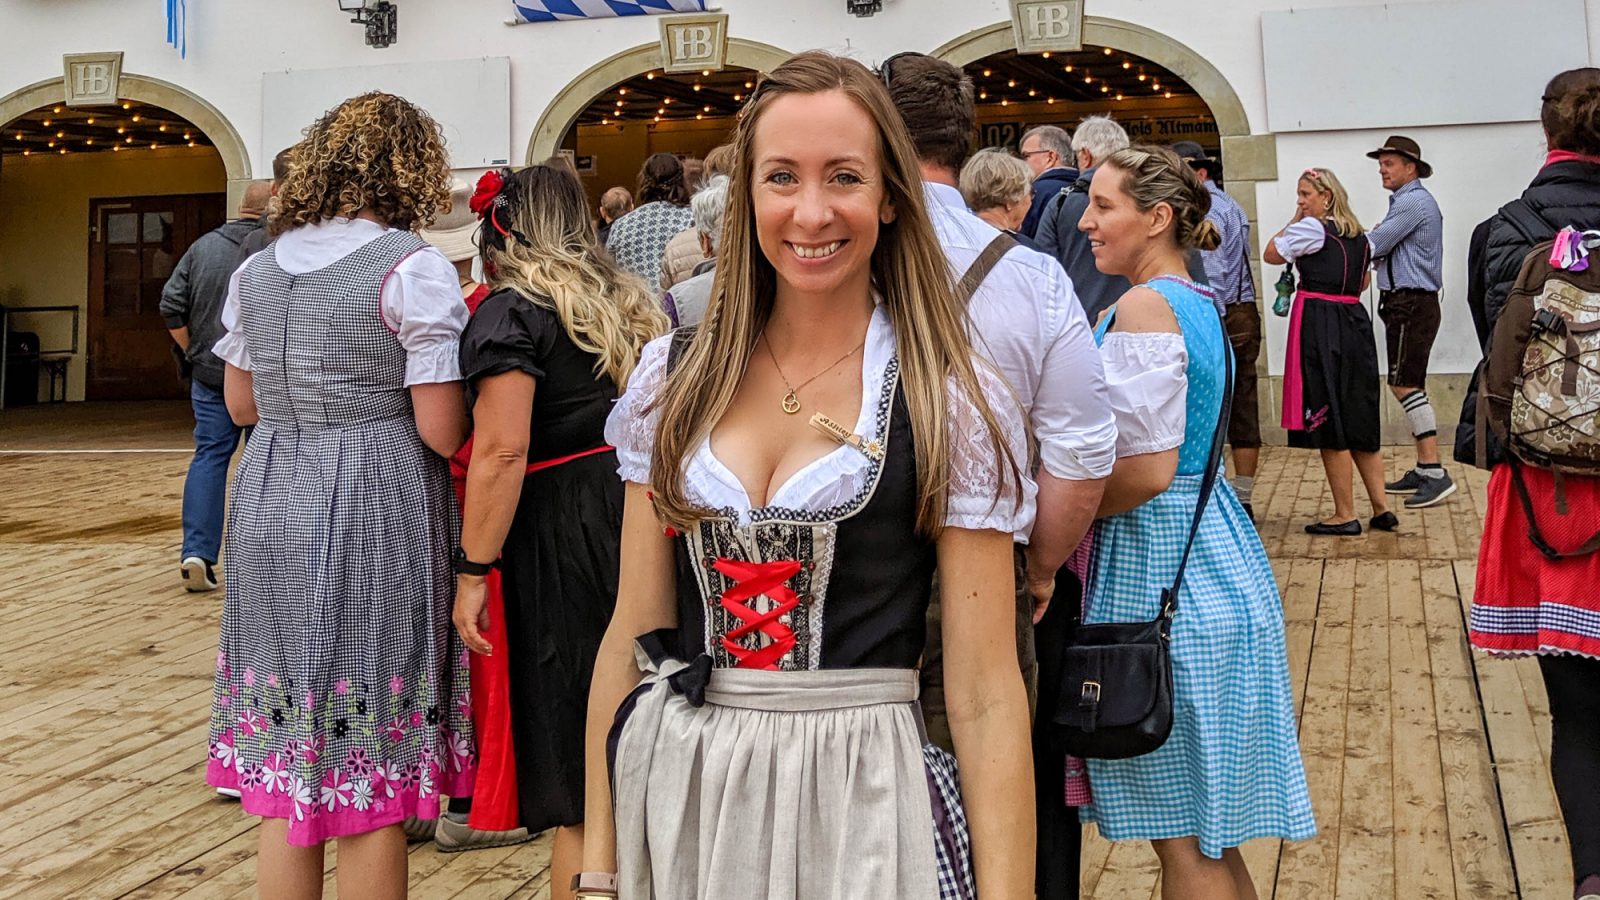 What to Wear to Oktoberfest 2024: Complete Oktoberfest Clothing Guide